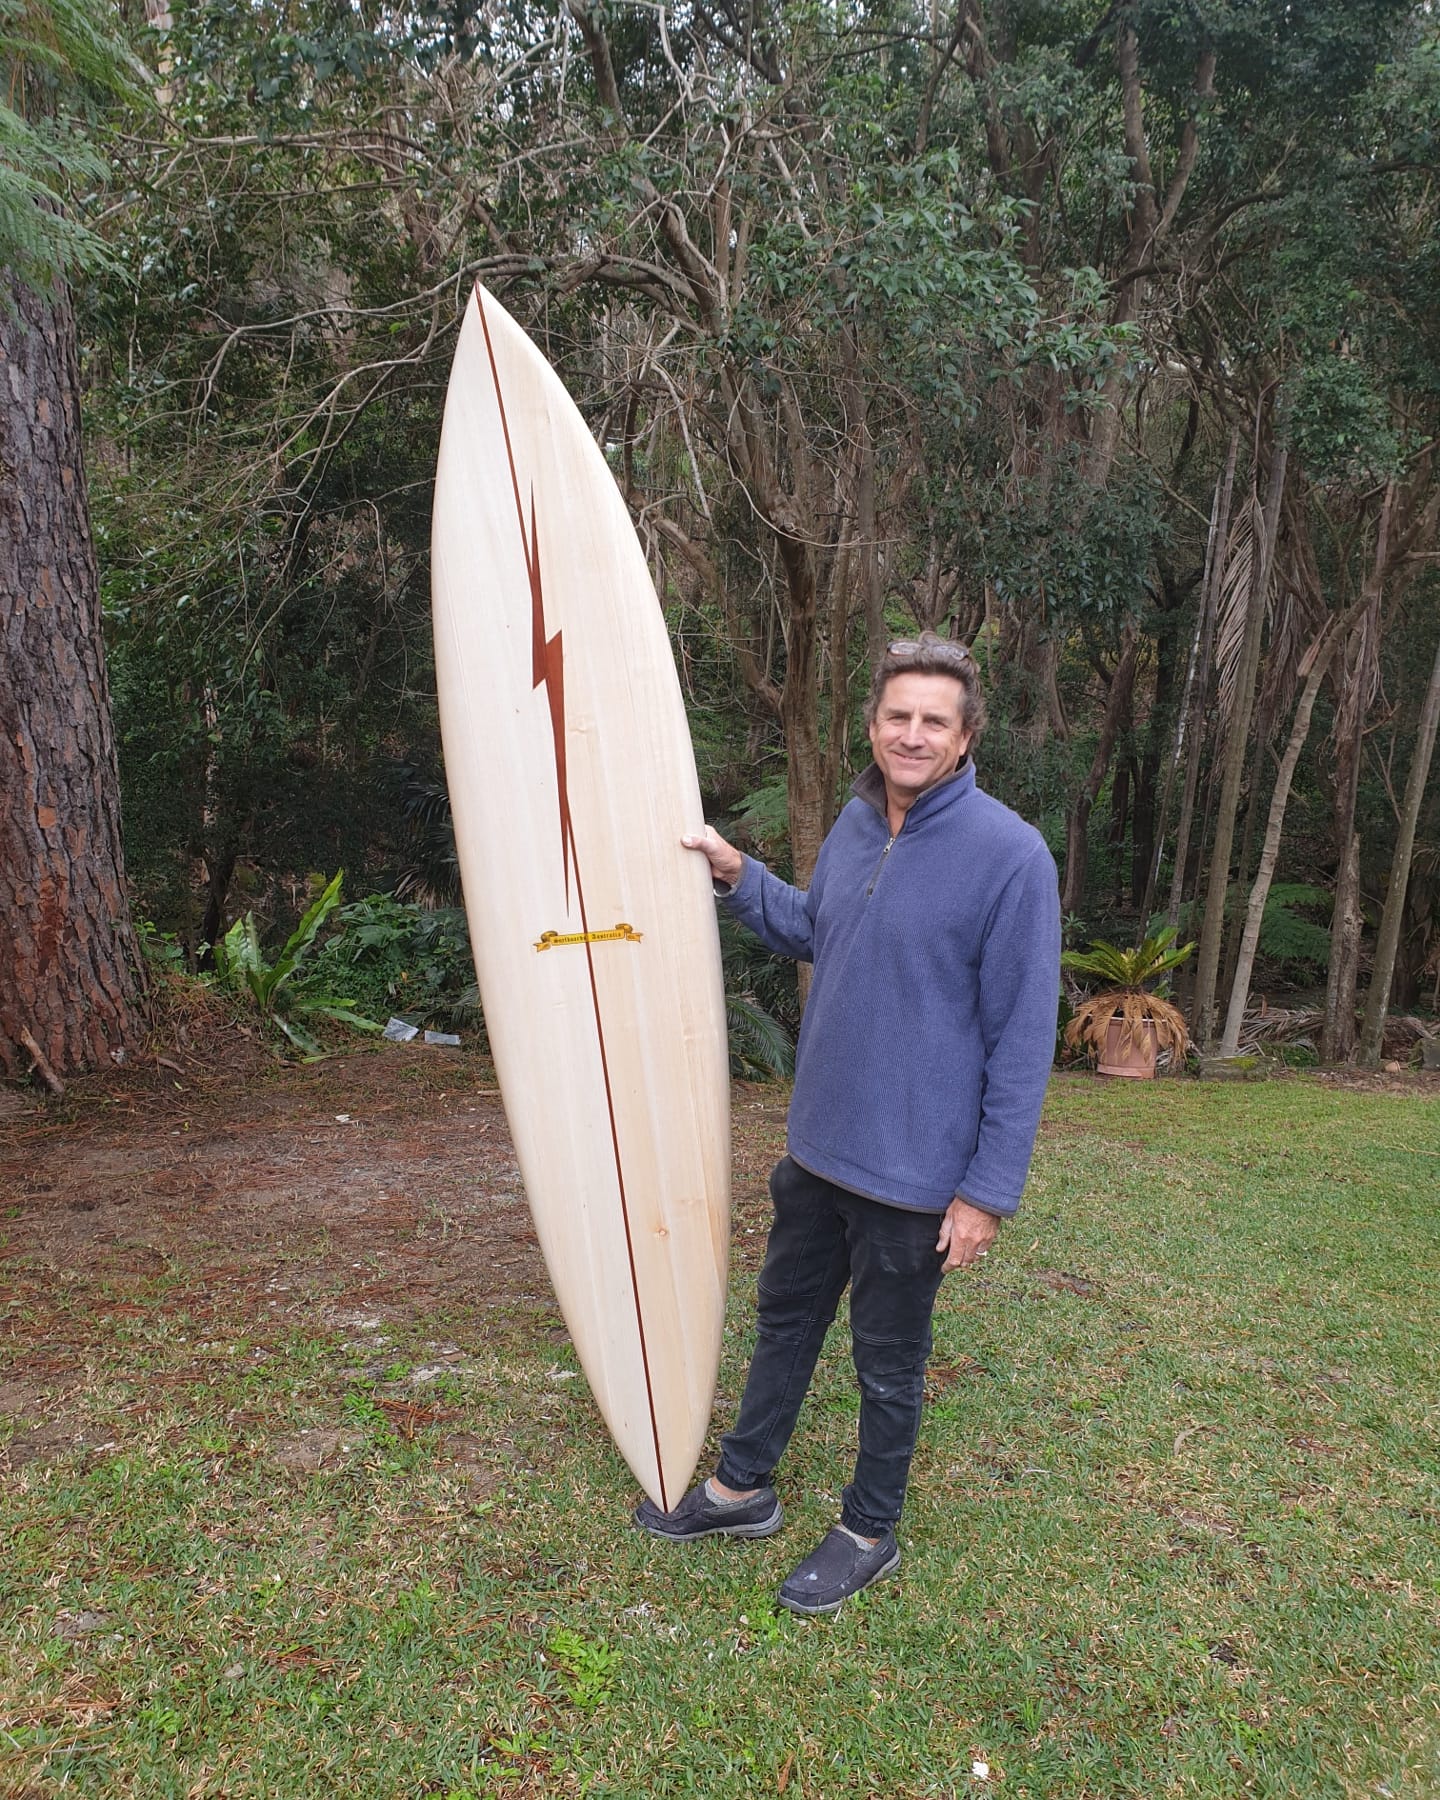 About Balsawood - Riley Balsa Wood Surfboards